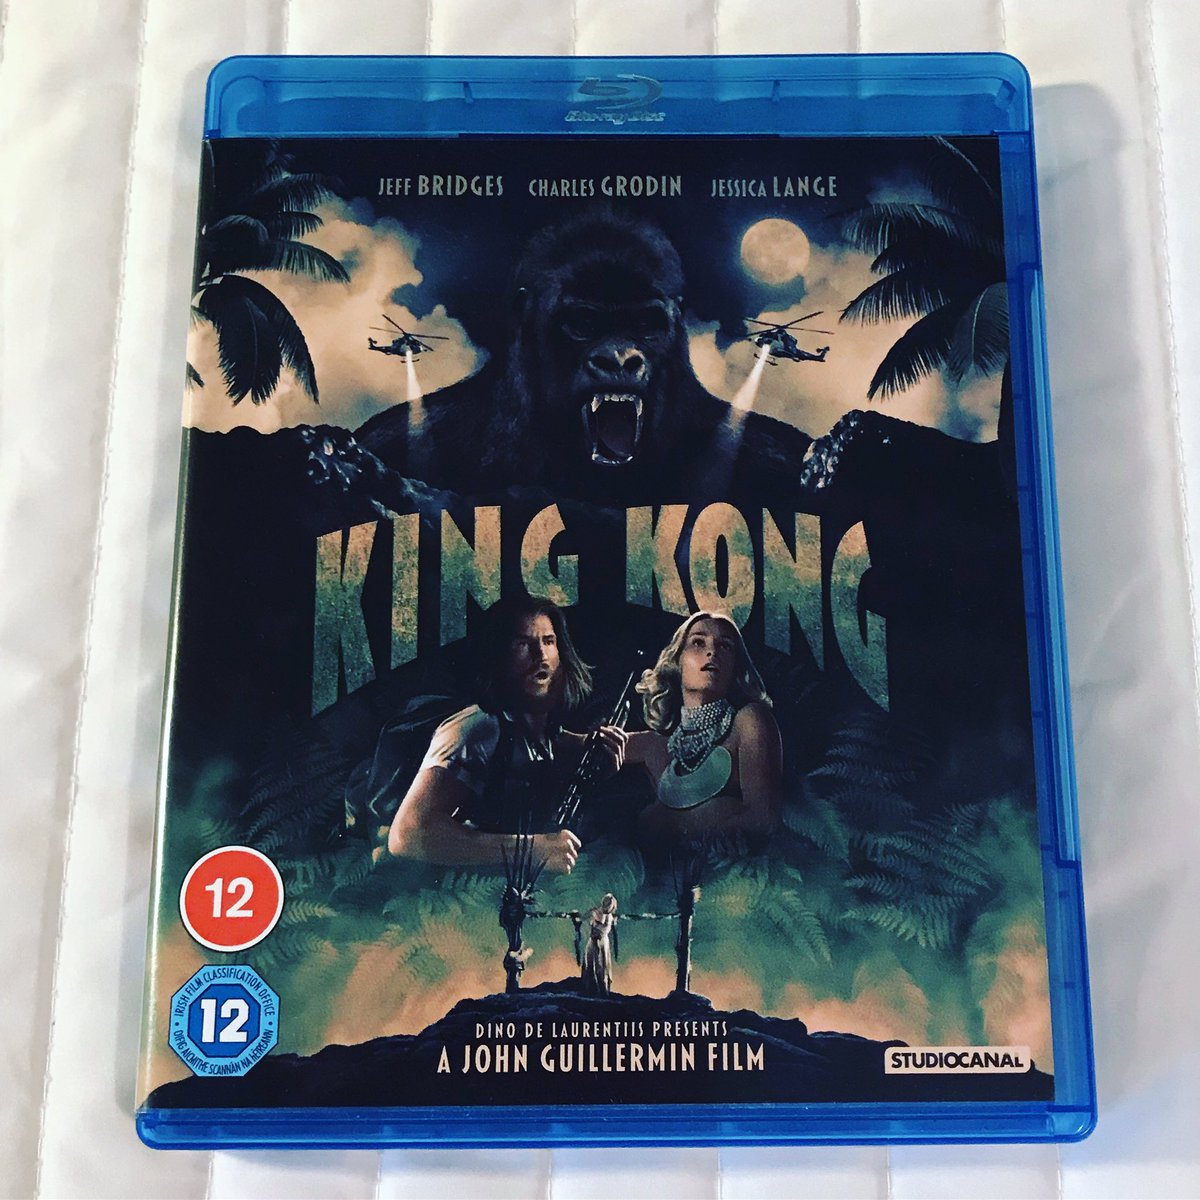 Watching 'King King' (1976). Starring Jessica Lange, Jeff Bridges and Charles Grodin. I love the 1930s original but had this version on VHS as a kid, so it's nice to finally rewatch it. 🎥

#KingKong #KingKong1976 #JessicaLange #JeffBridges #CharlesGrodin #adventuremovie #bluray